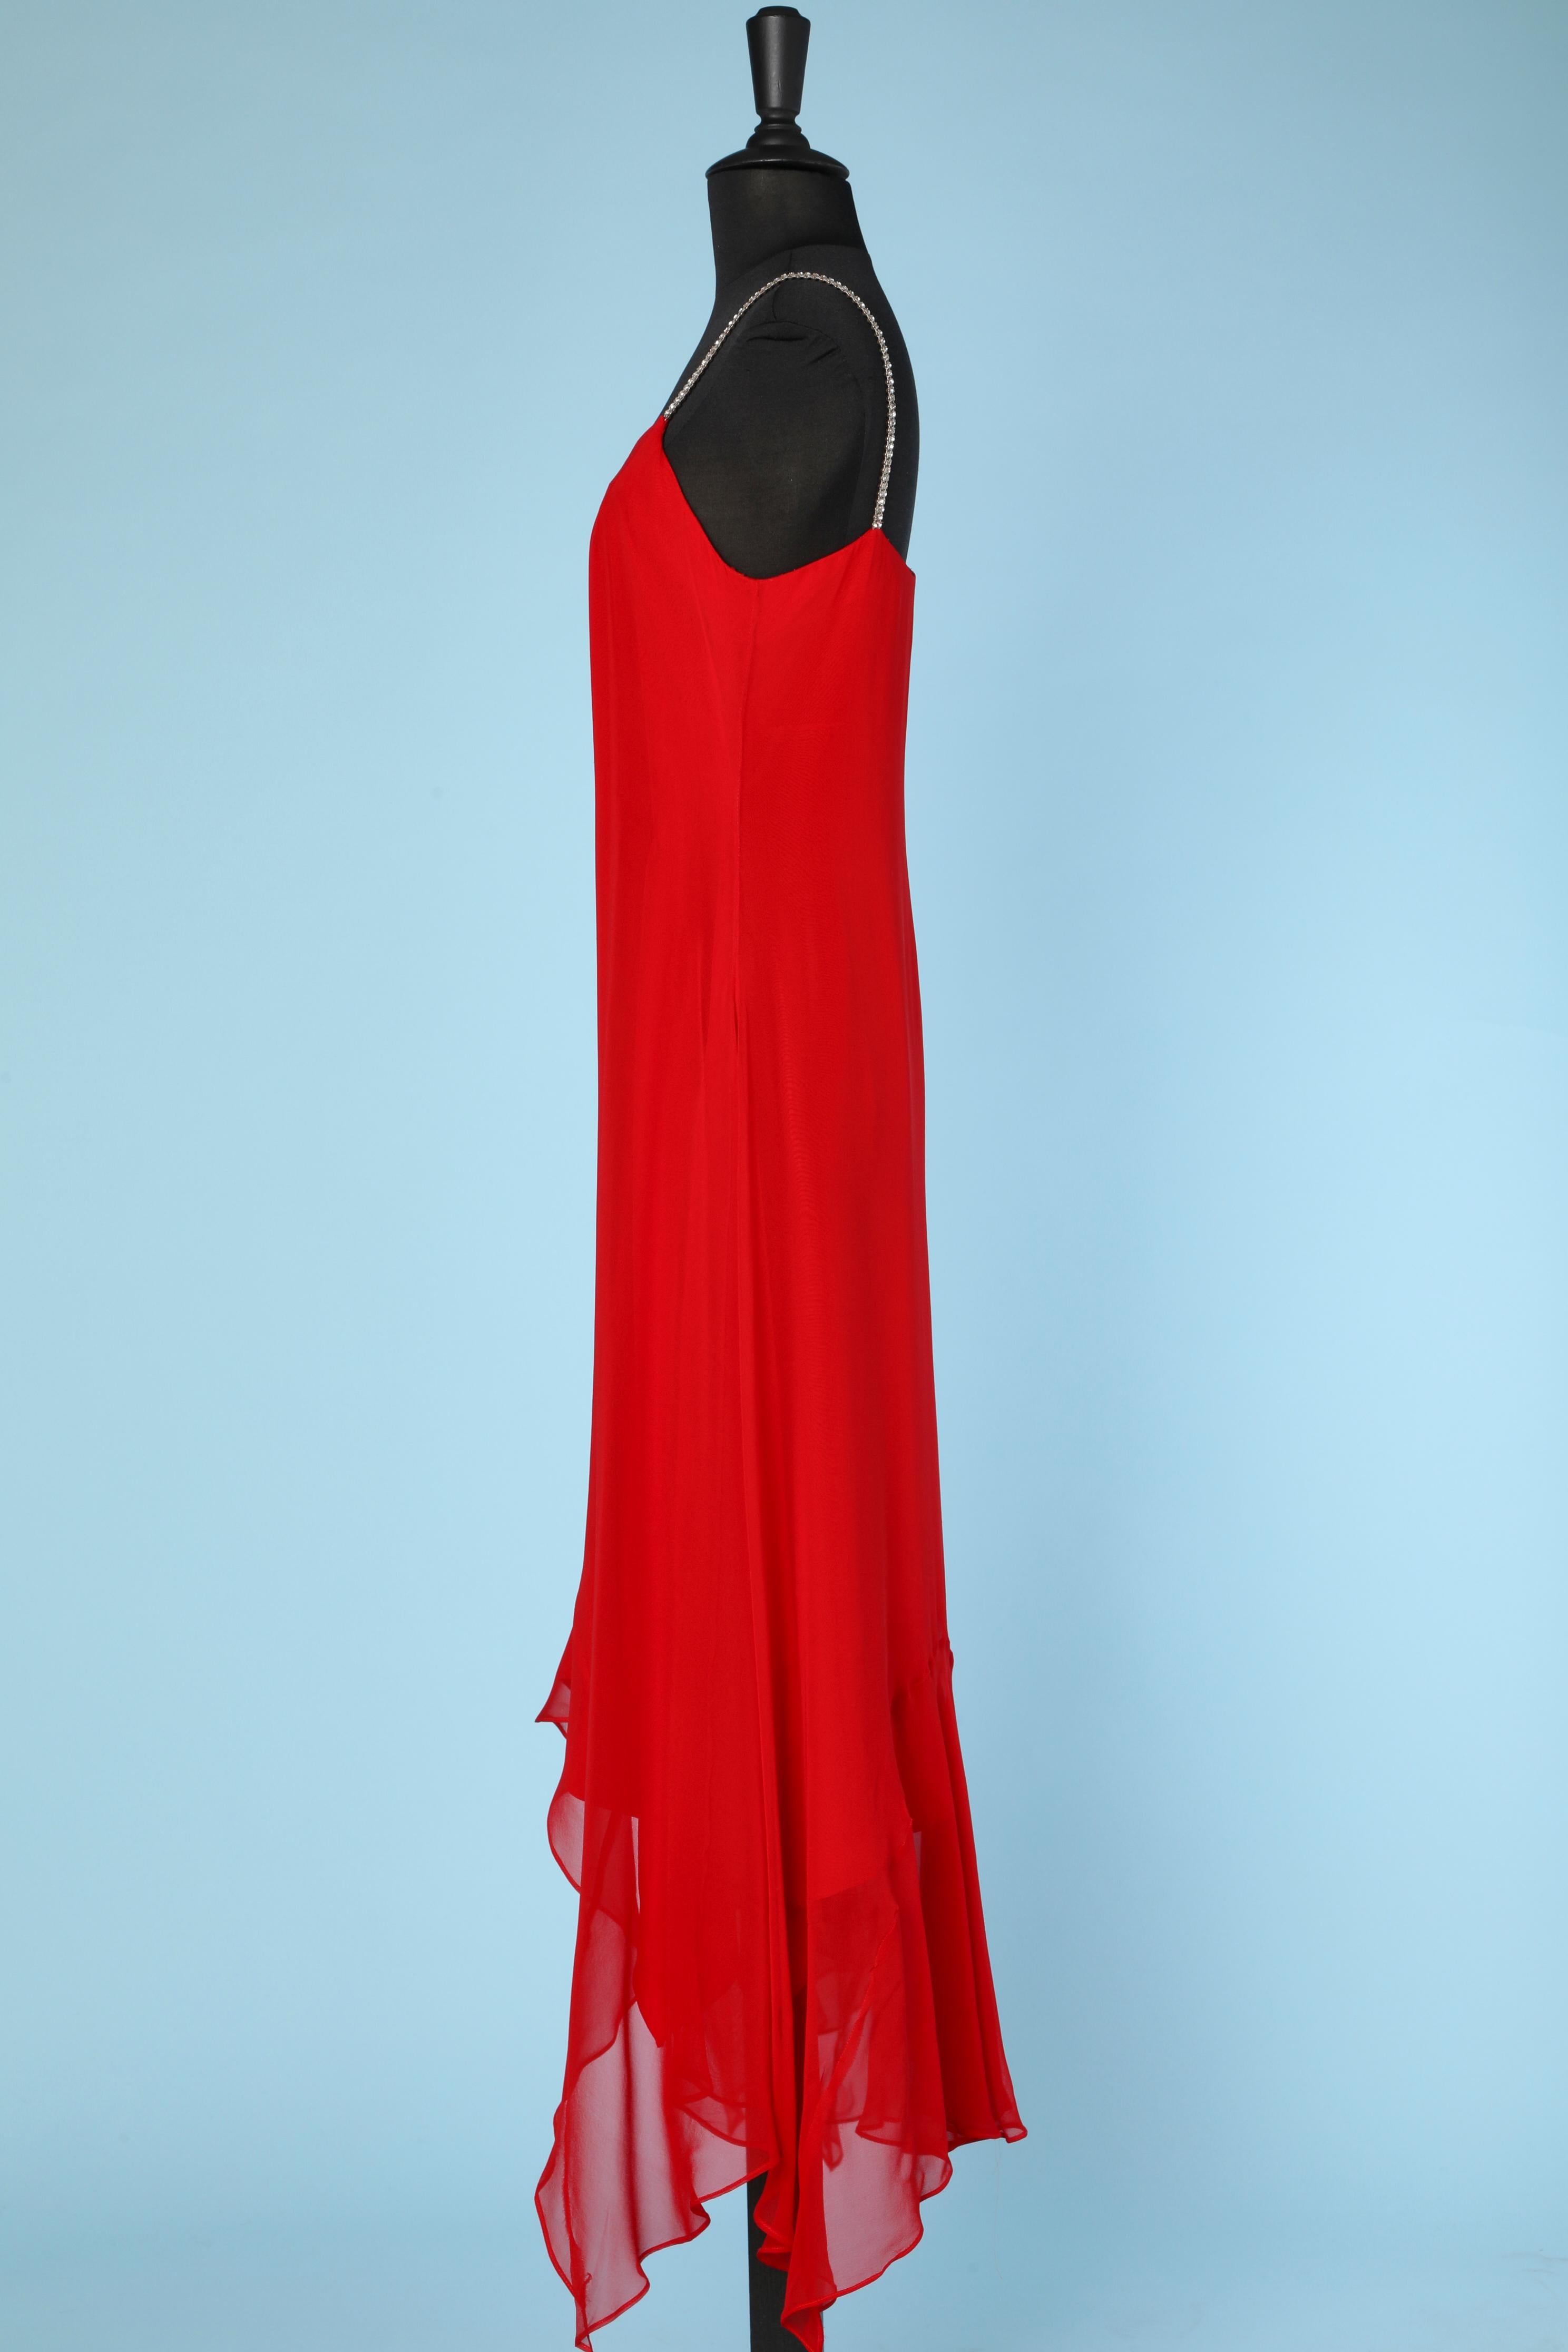 Women's Red chiffon evening dress and cape, rhinestone shoulder straps and buckle 1960's